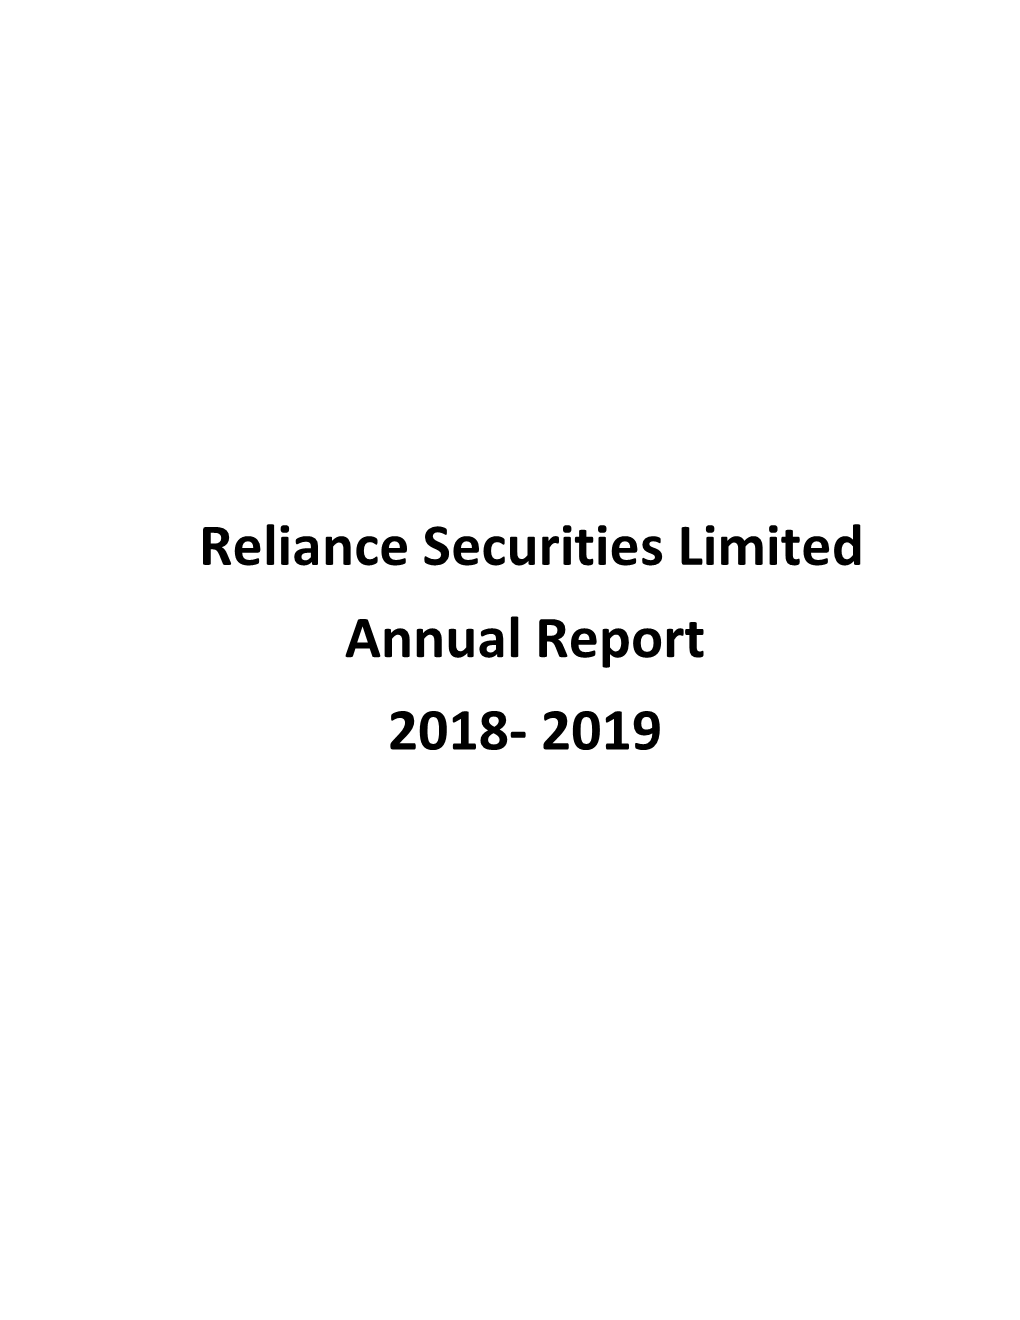 Reliance Securities Limited Annual Report 2018- 2019